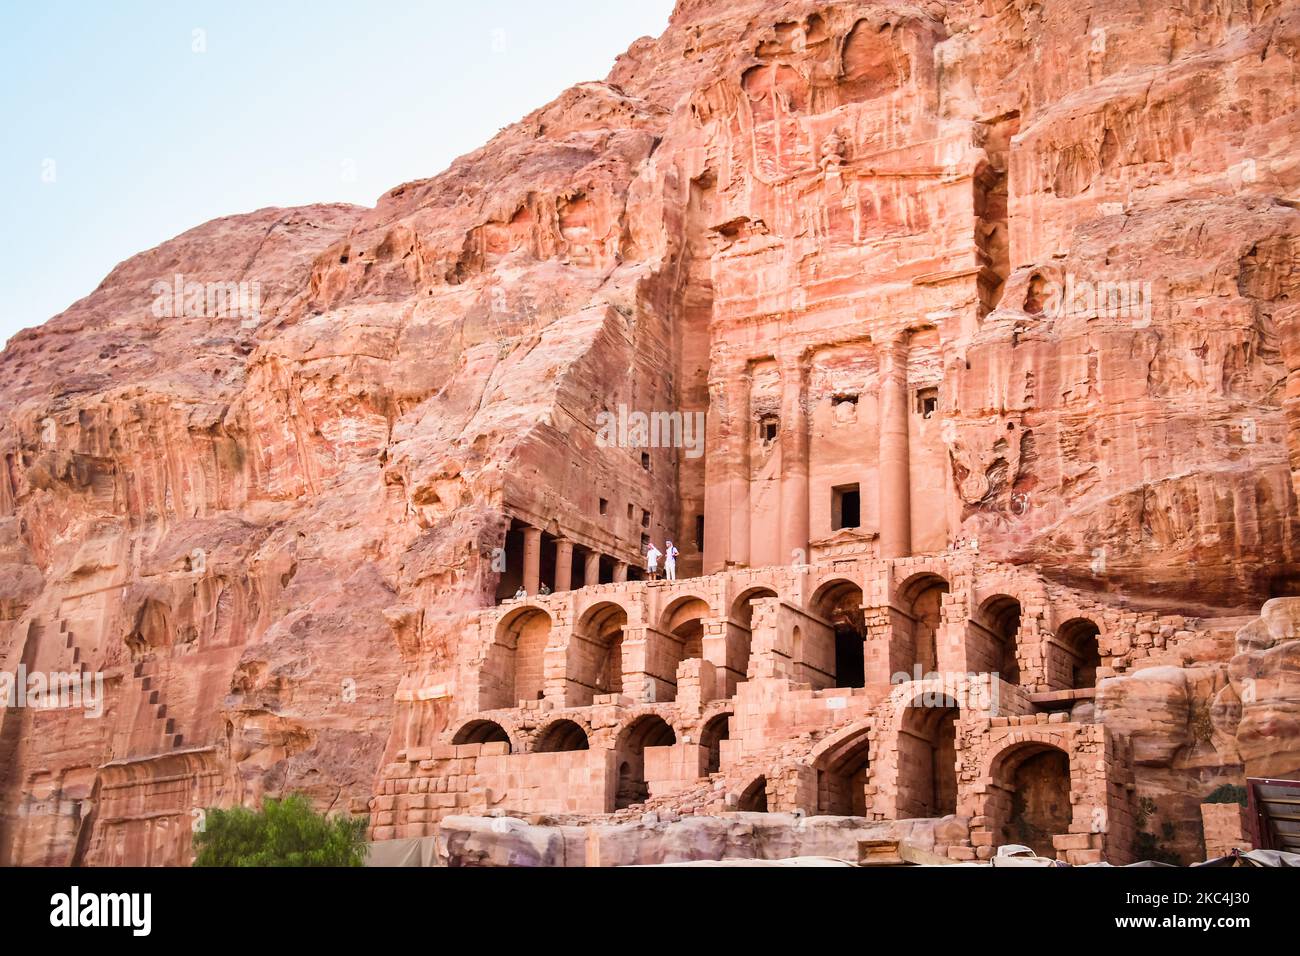 Tourist stand by Royal tombs structures in ancient city of Petra, Jordan. UNESCO World Heritage Site Stock Photo